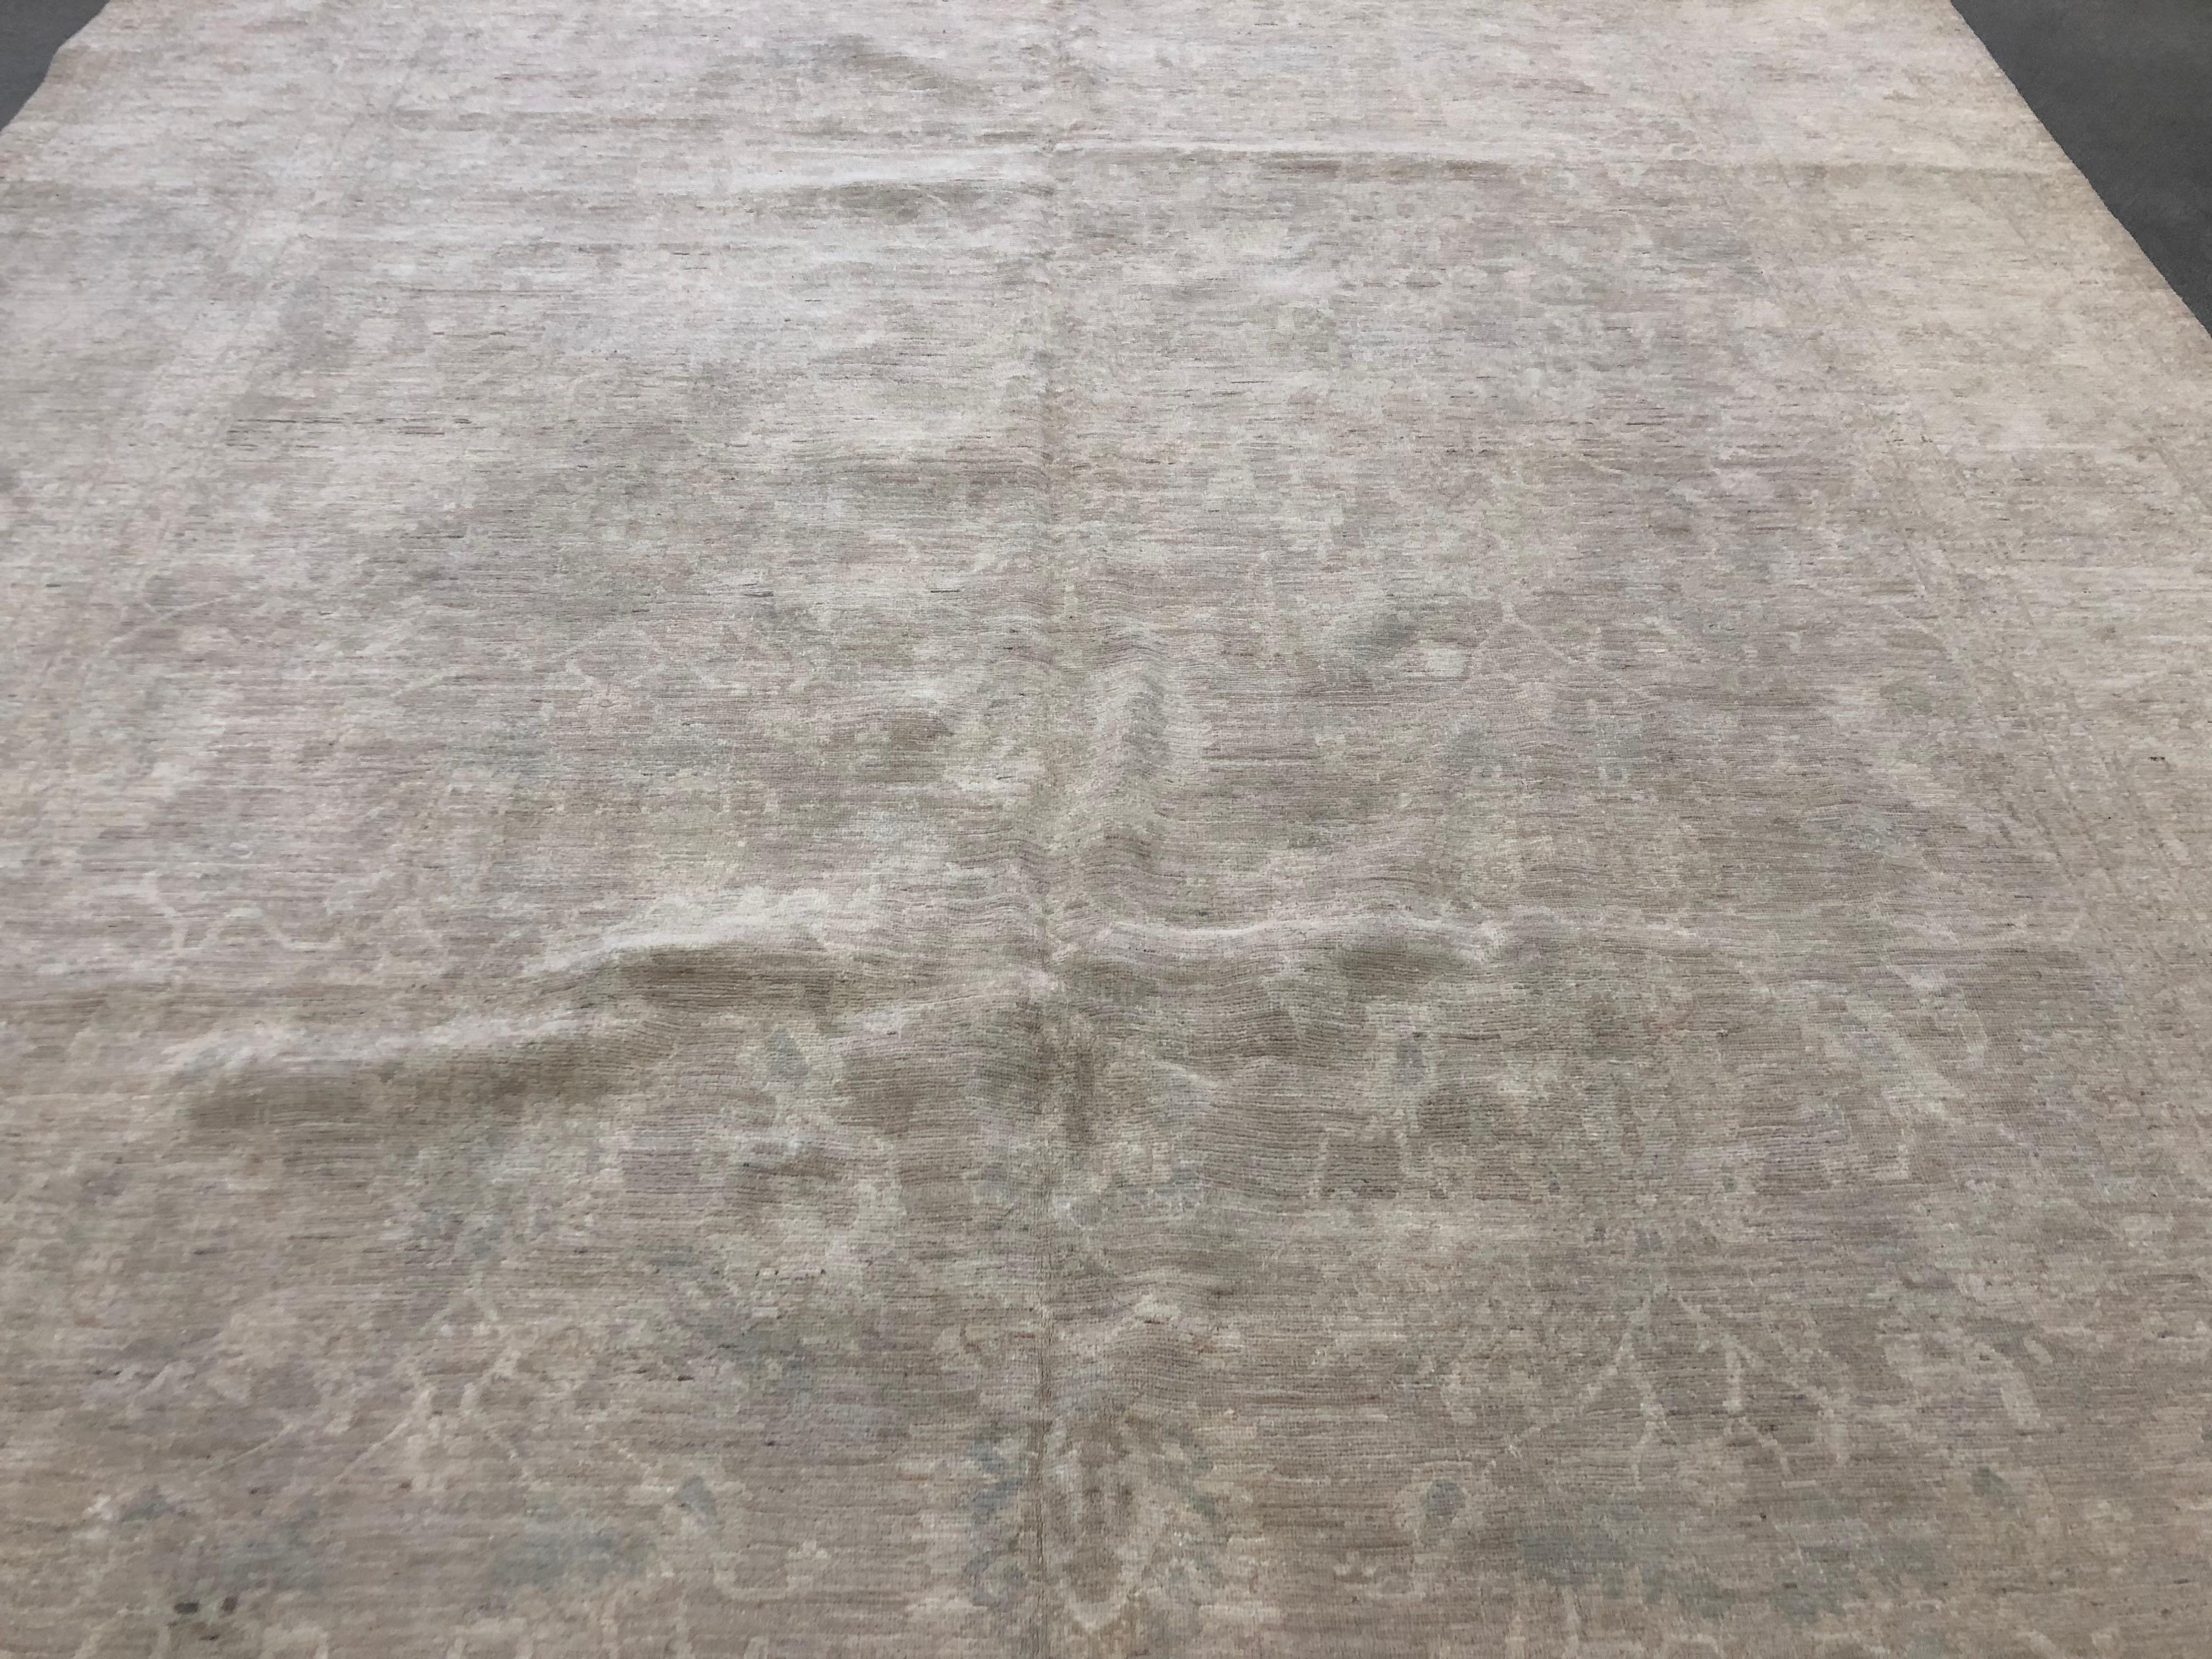 Neutral beige, tan and taupe tones make this elegant traditional style area rug one of the most versatile rugs you'll find. Hand knotted wool also makes it one of the most durable. Great for the living room or bedroom. Made in Pakistan using vegetal